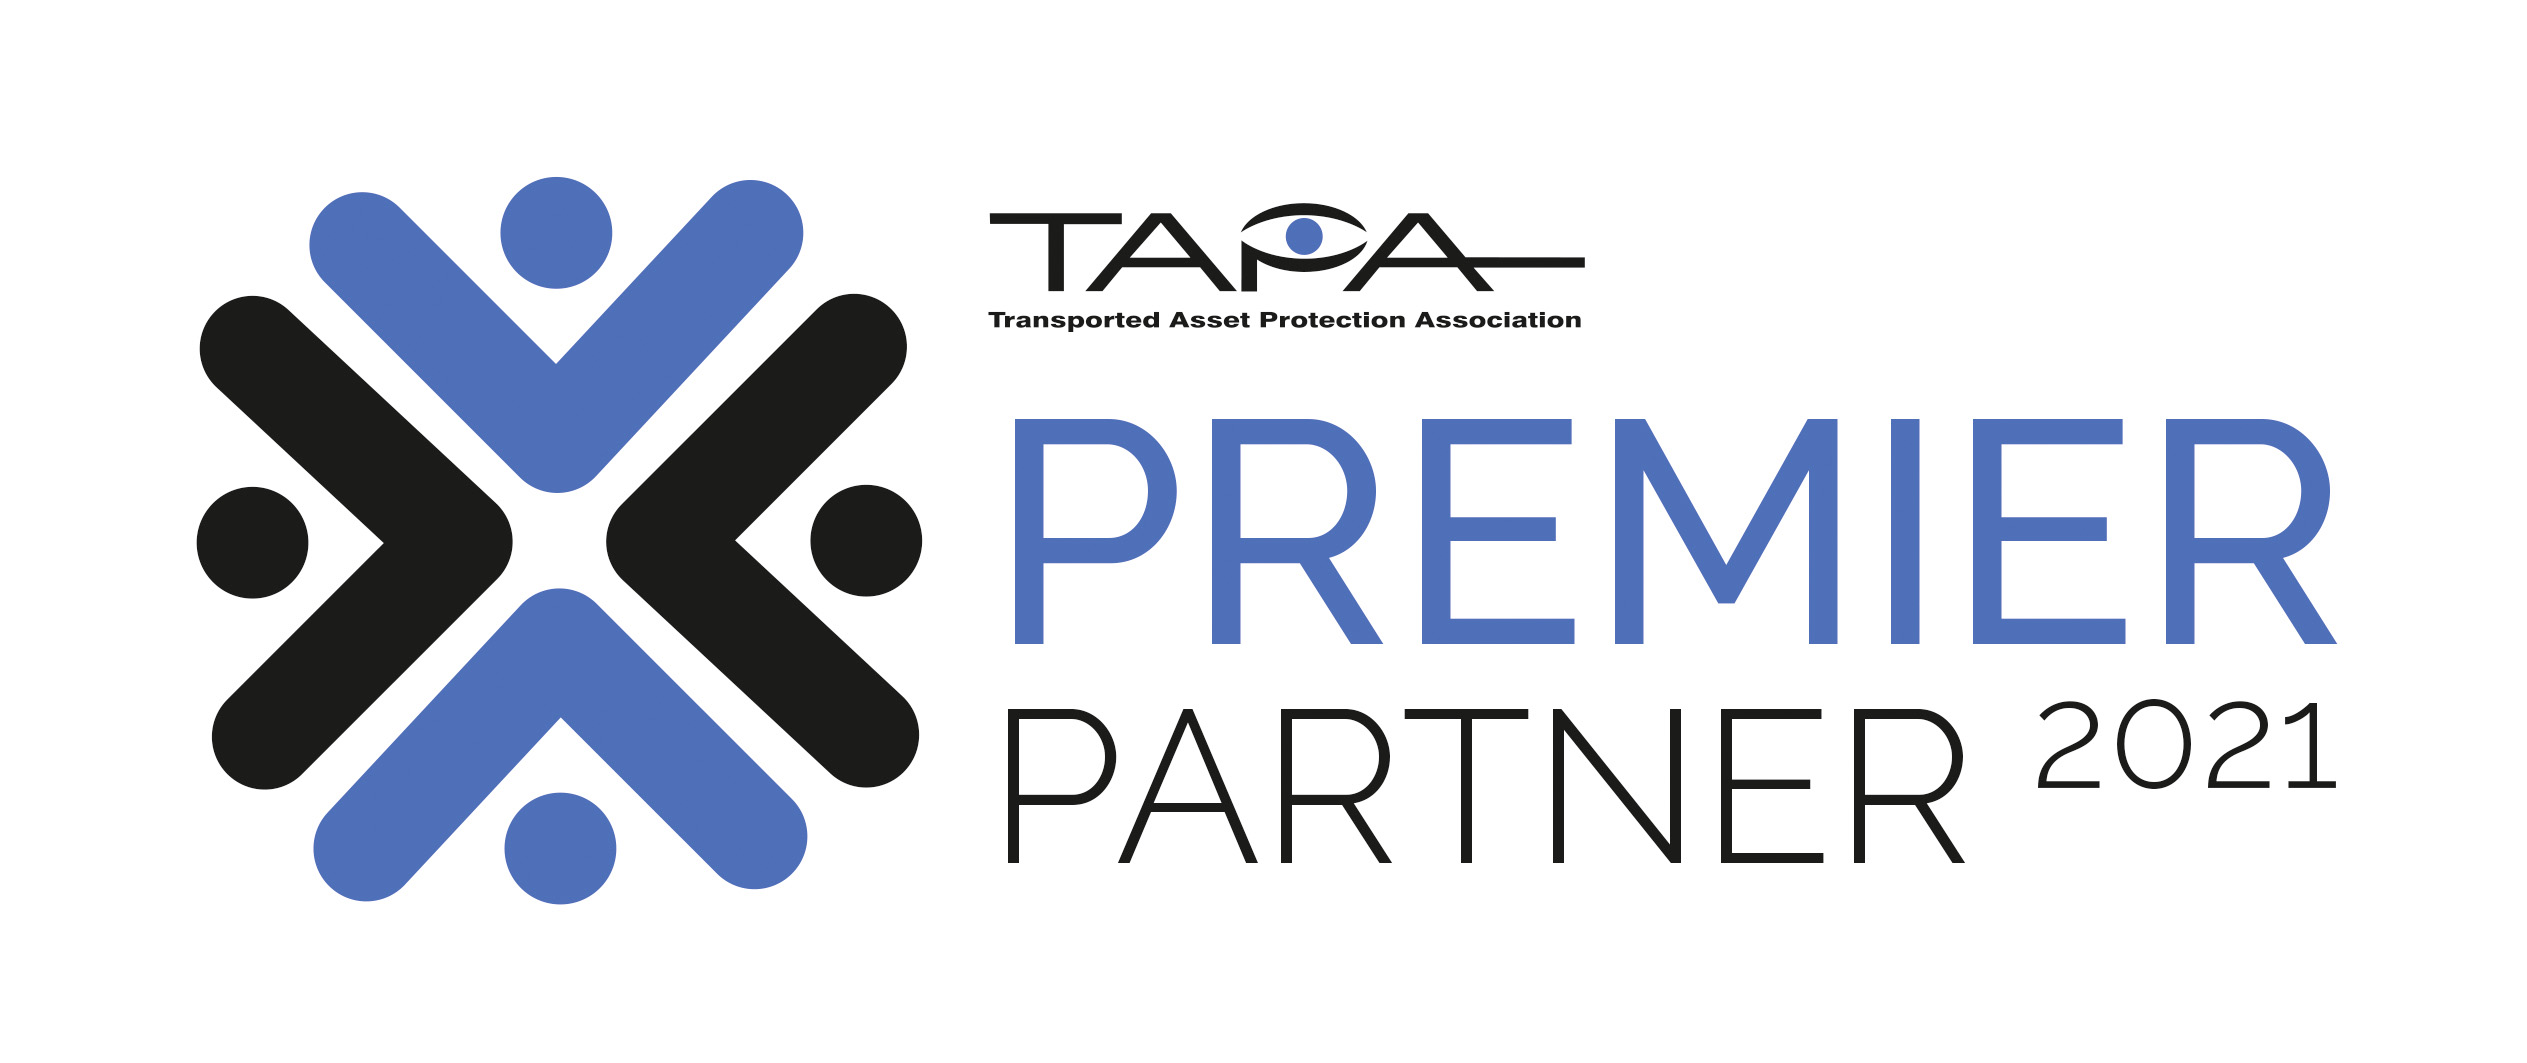 MULTIPROTEXION IS TAPA PREMIER PARTNER 2021